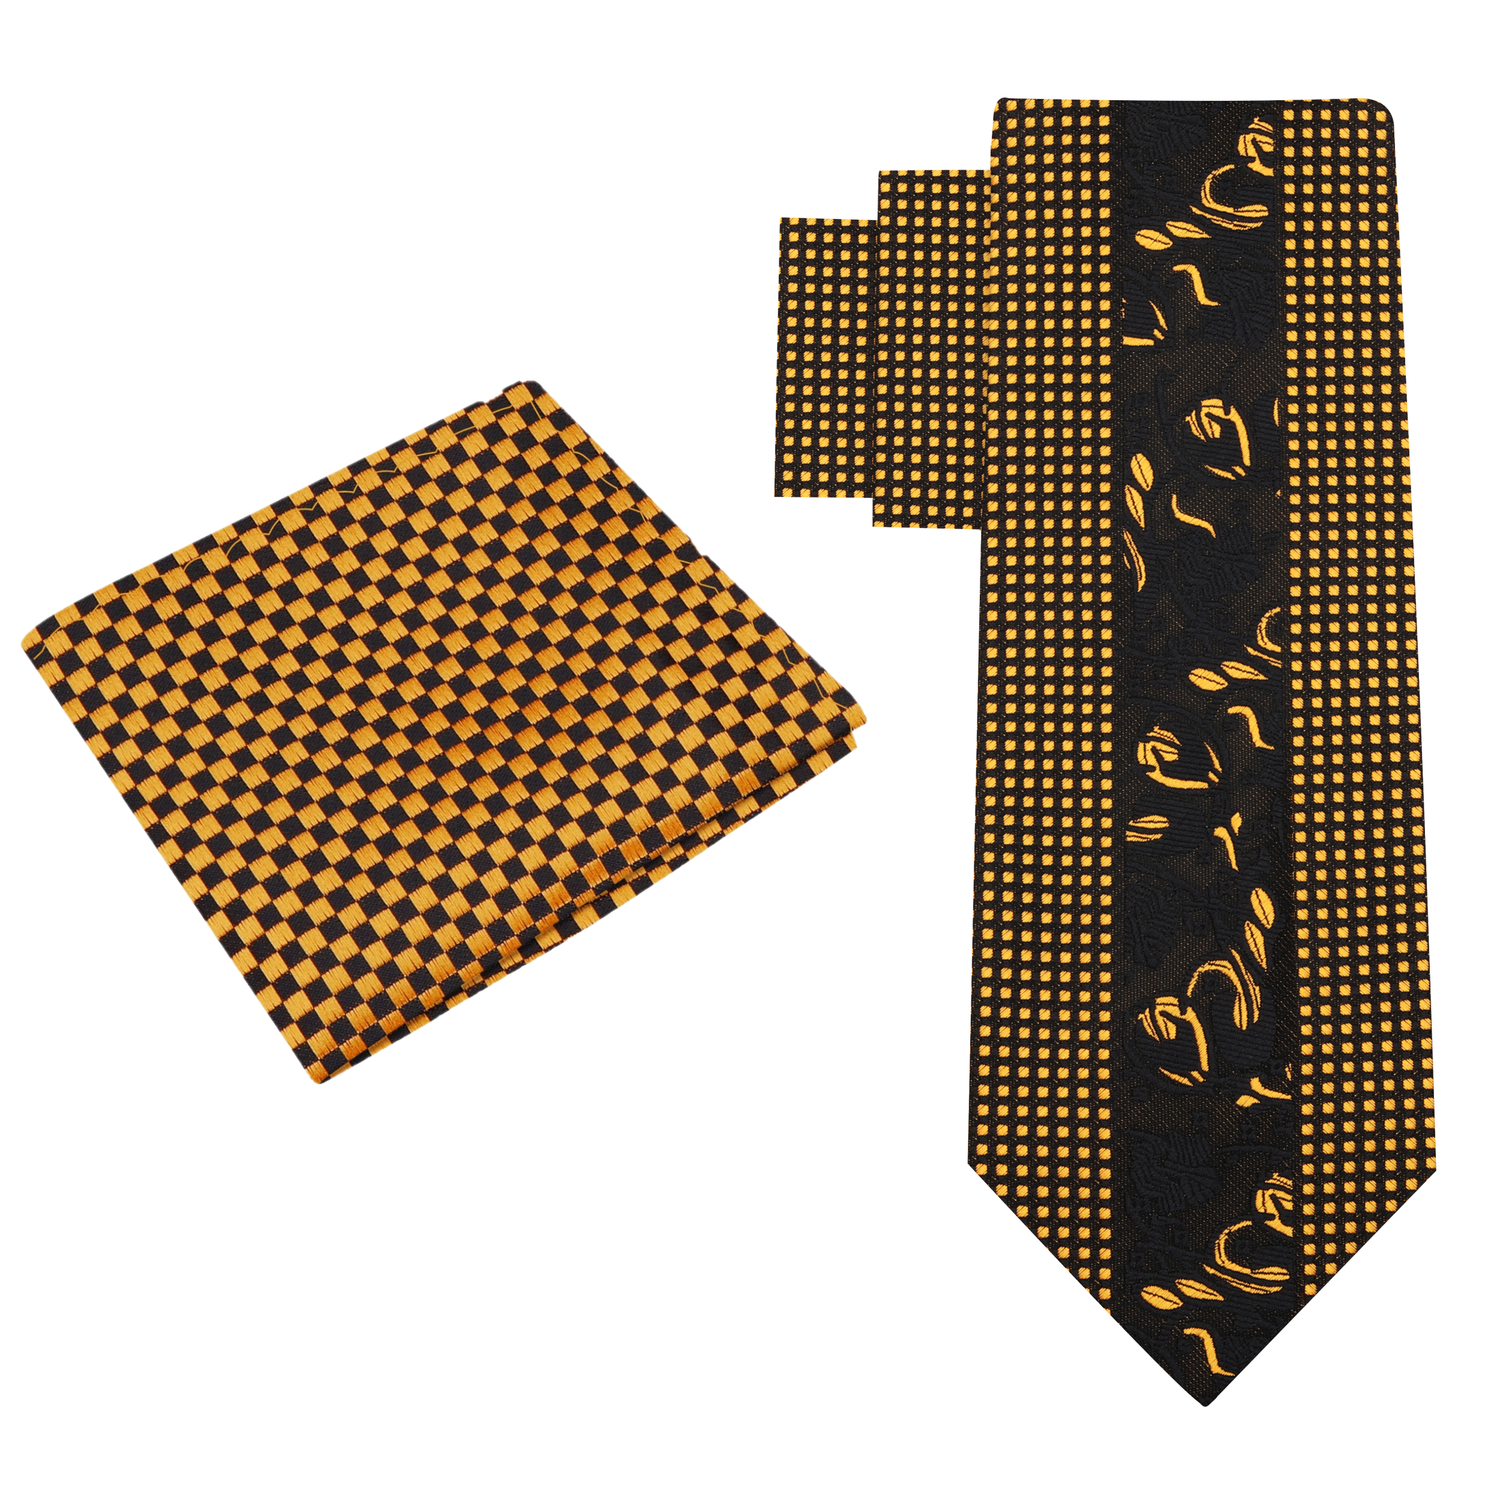 Alt View: Black & Gold Floral and Check Necktie with Black, Gold Check Square